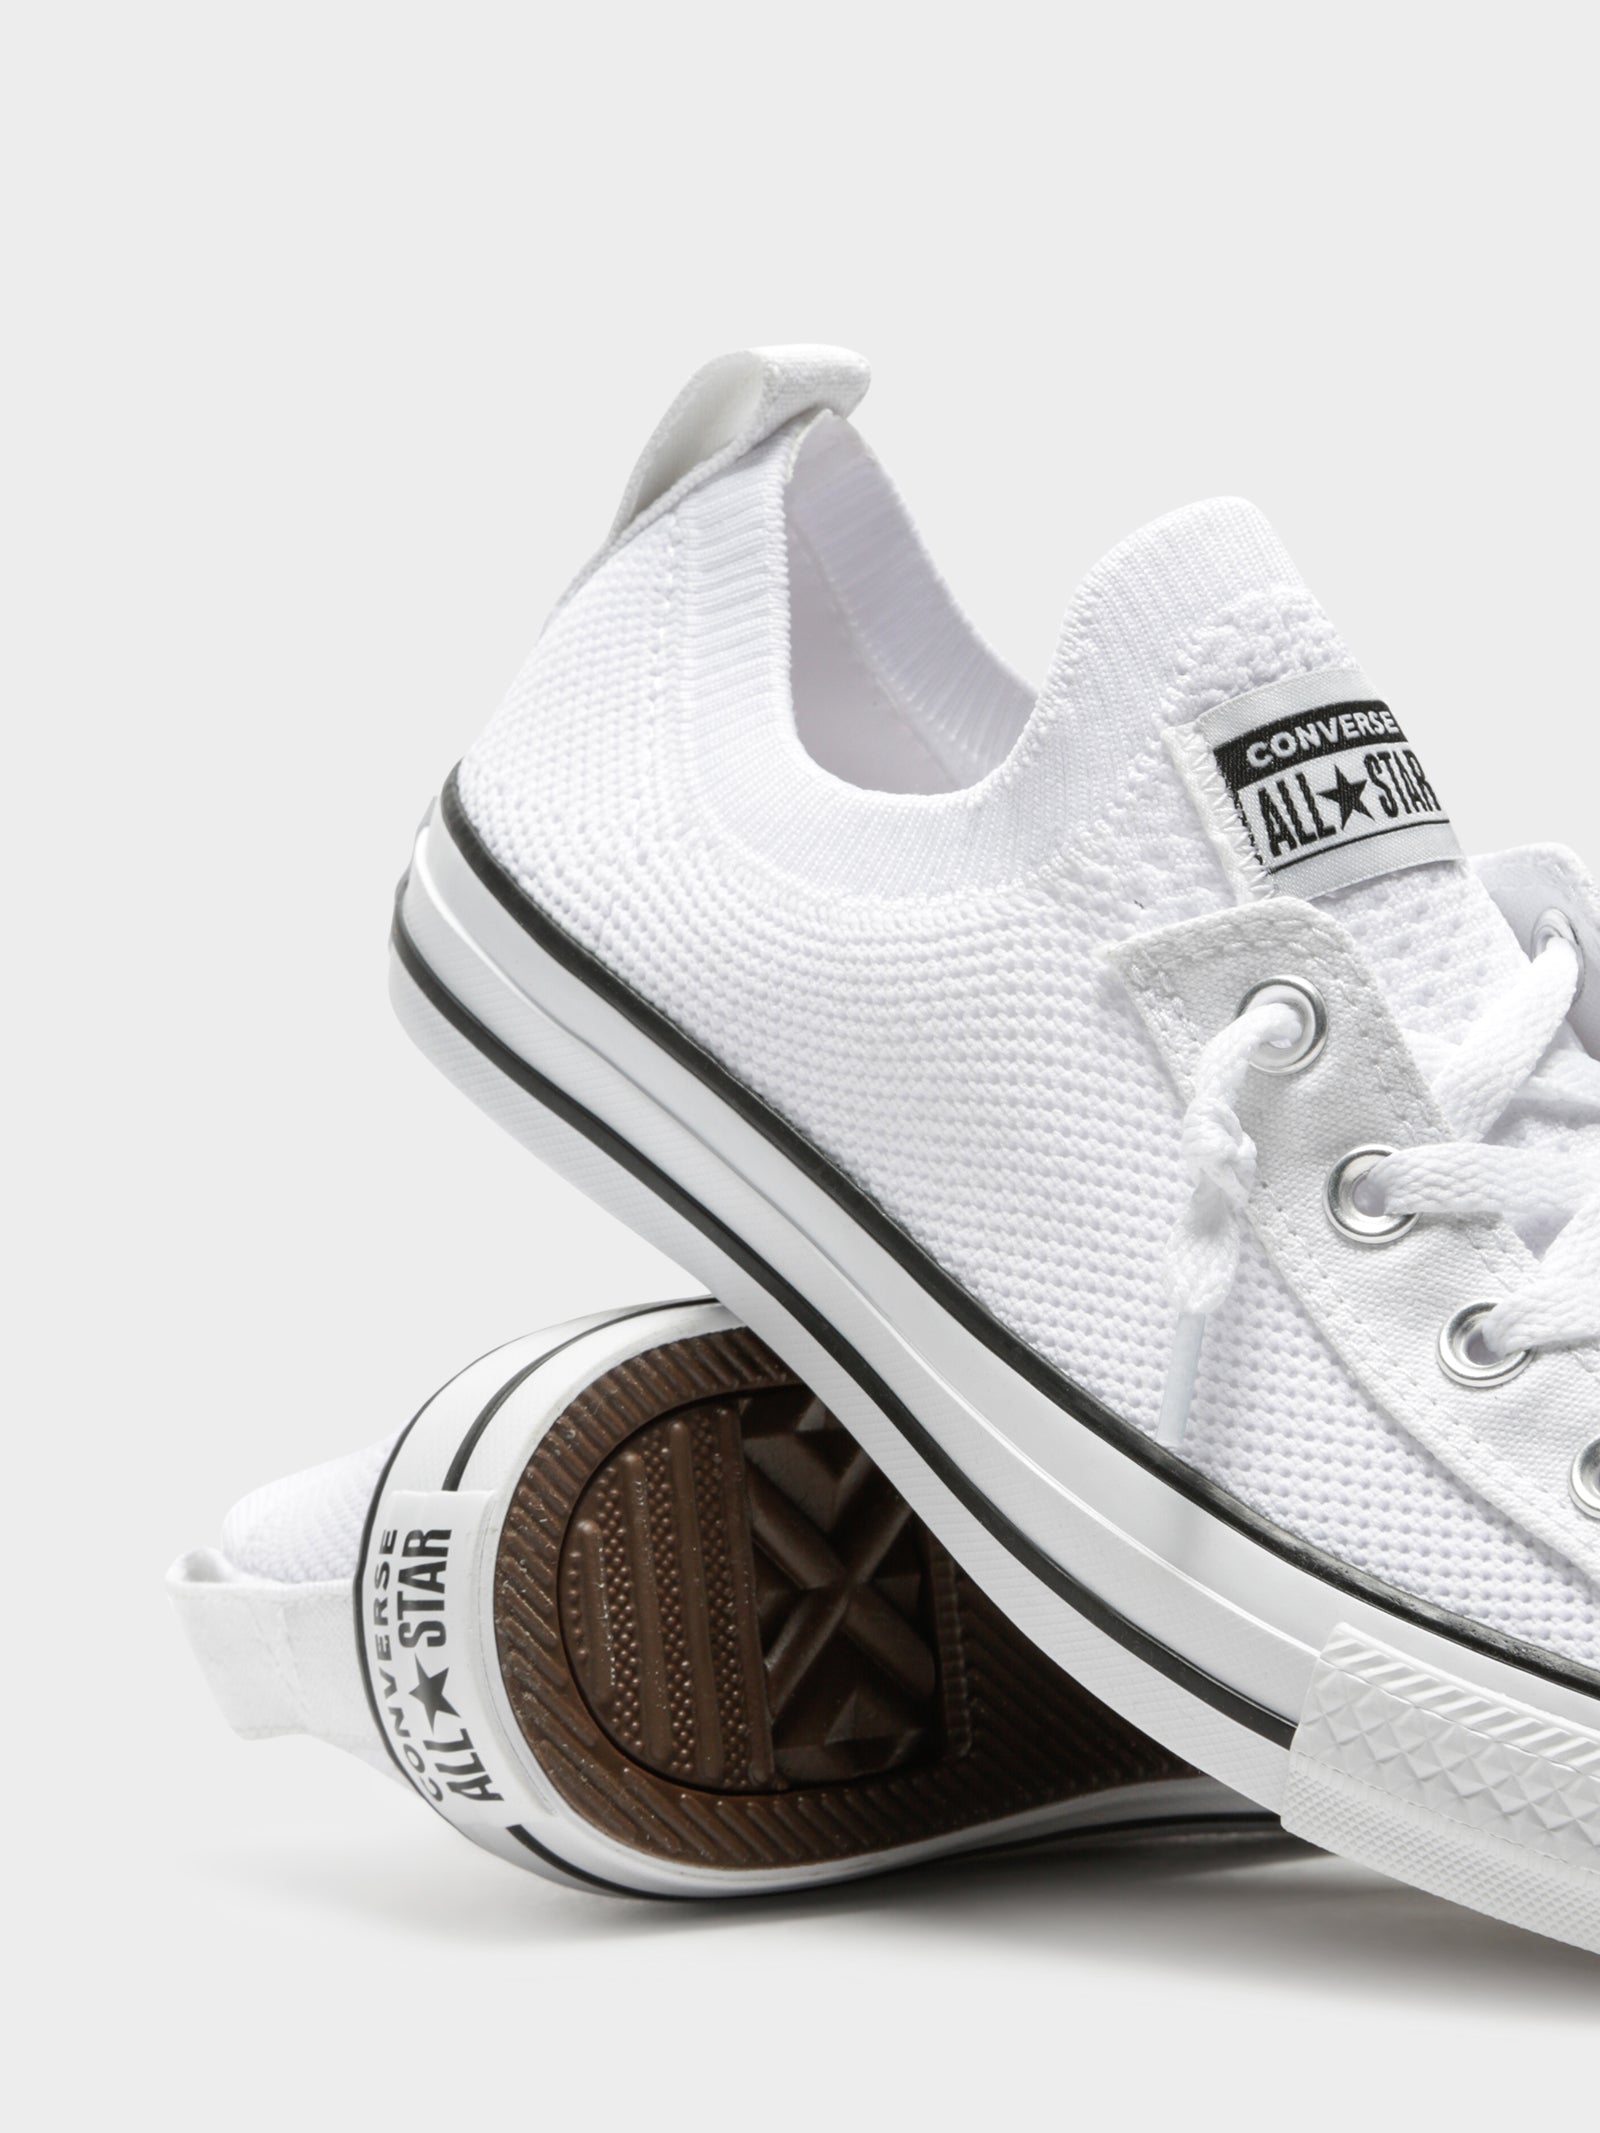 Chuck Taylor All Star Shoreline Knit Slip-On Sneakers in White - Glue Store